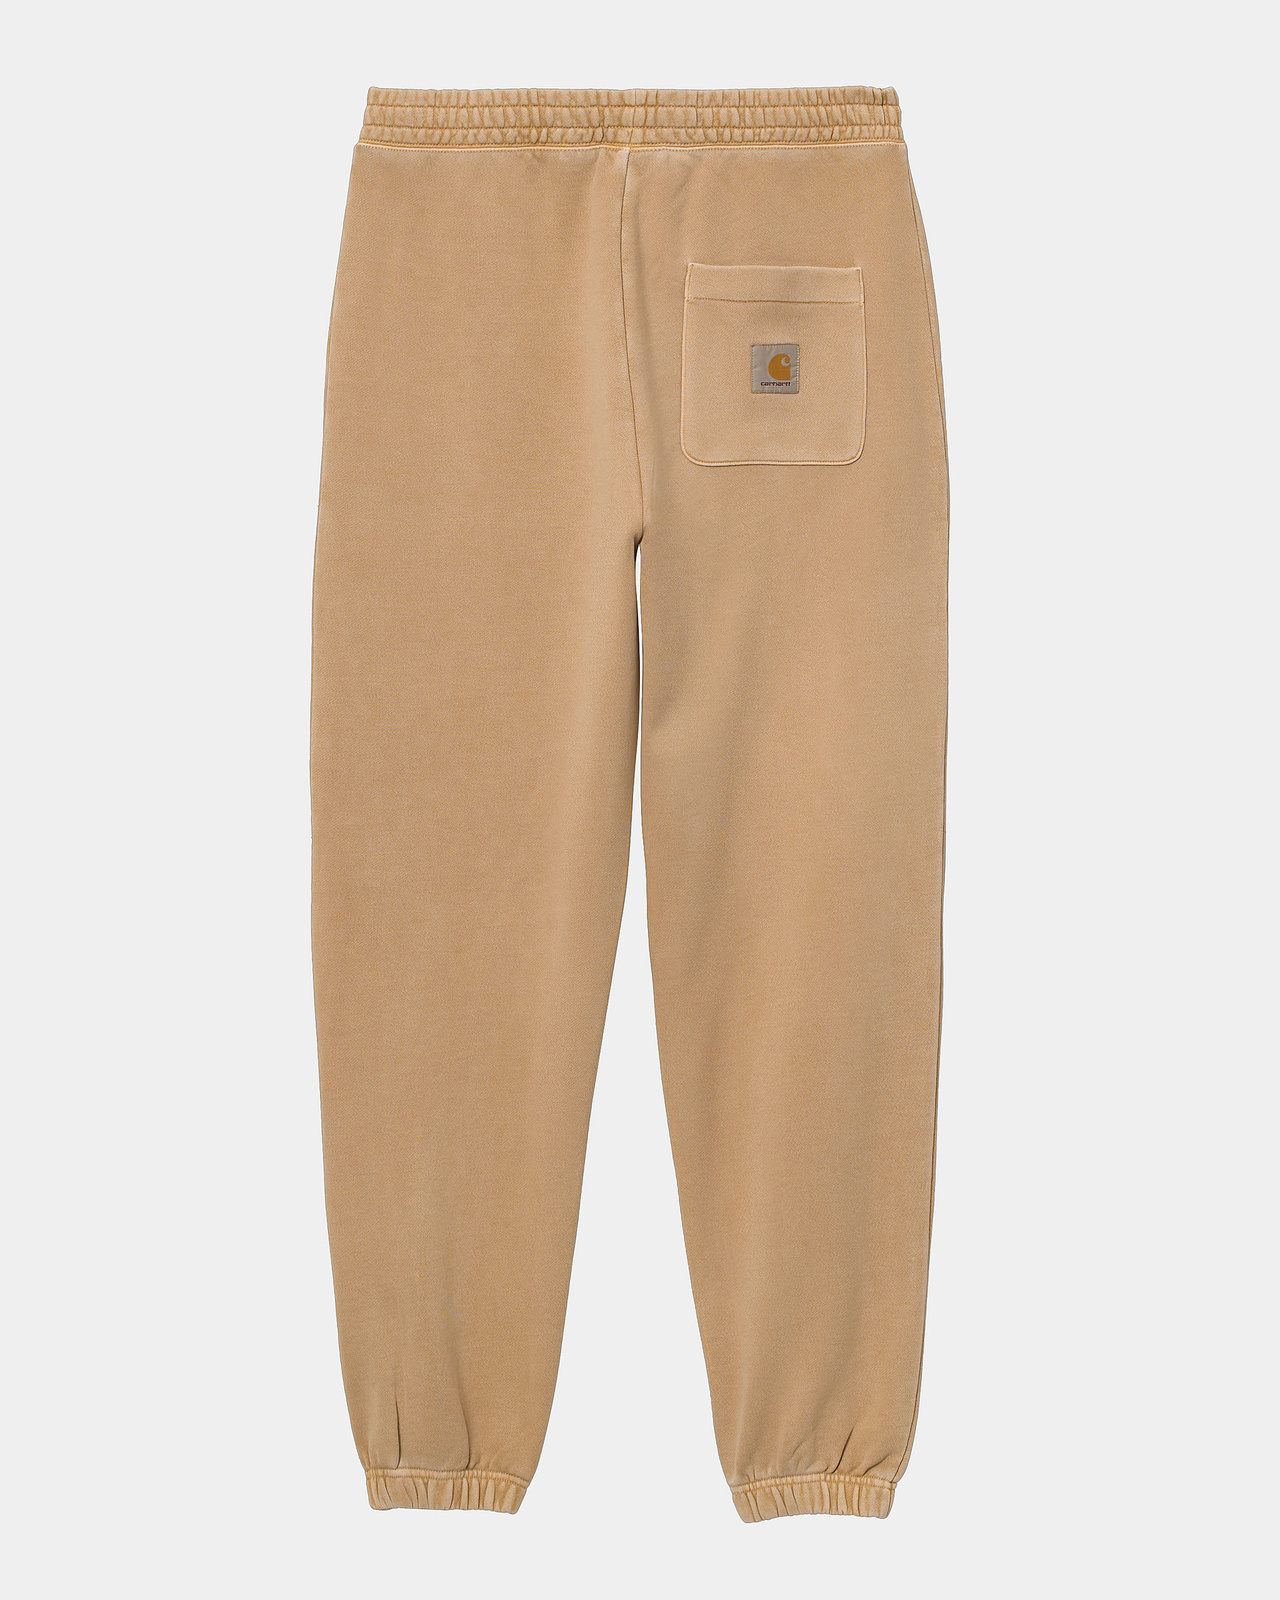 Nelson Sweat Pant - Dusty H Brown - M